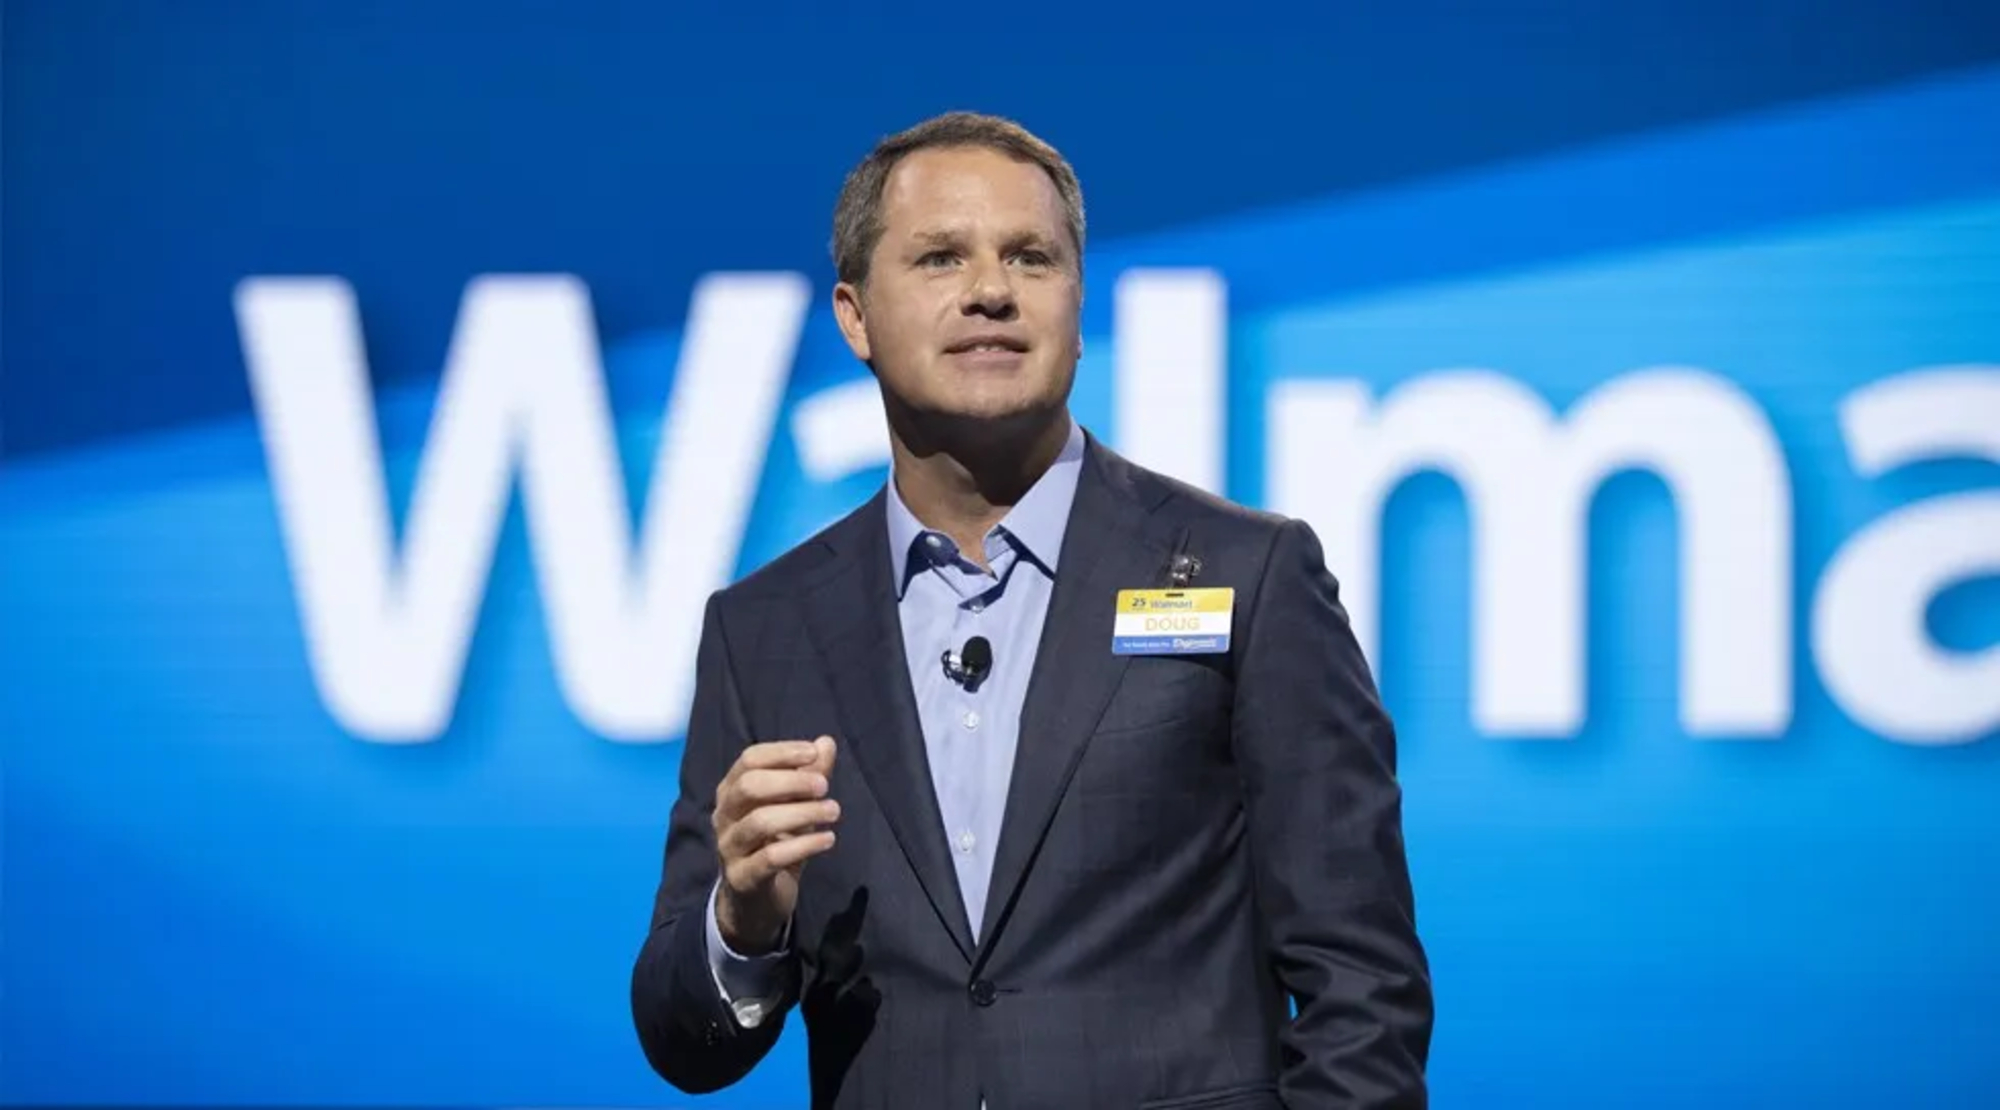 How Much Walmart's Top Boss Earns: A Look at Doug McMillon's Multi-Million Dollar Payday Compared to Store Workers